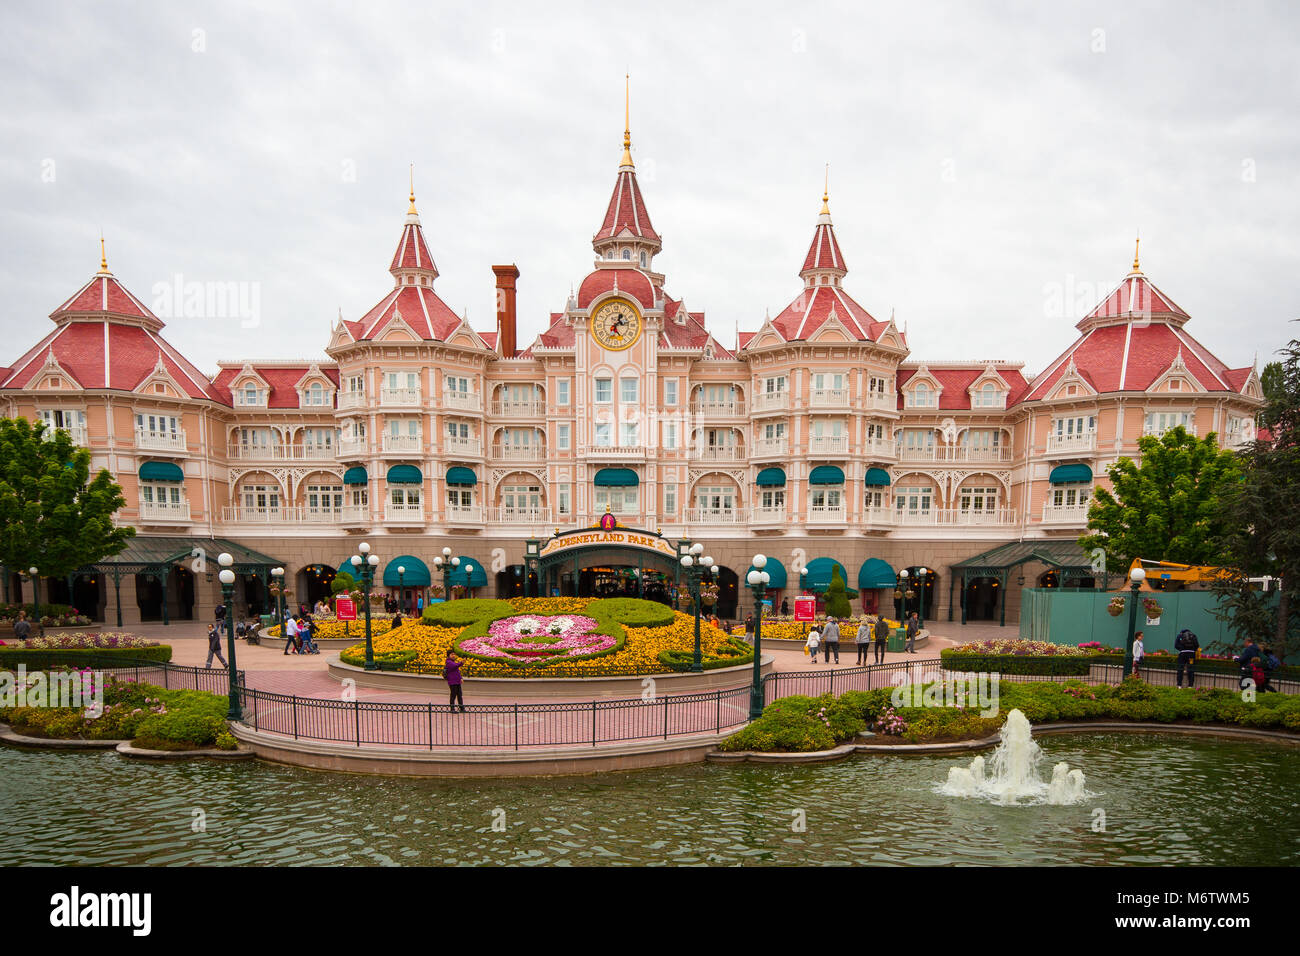 The Disneyland Hotel at Eurodisney in Paris is a luxury, five star hotel and the main entrance to the Disneyland Park. Stock Photo